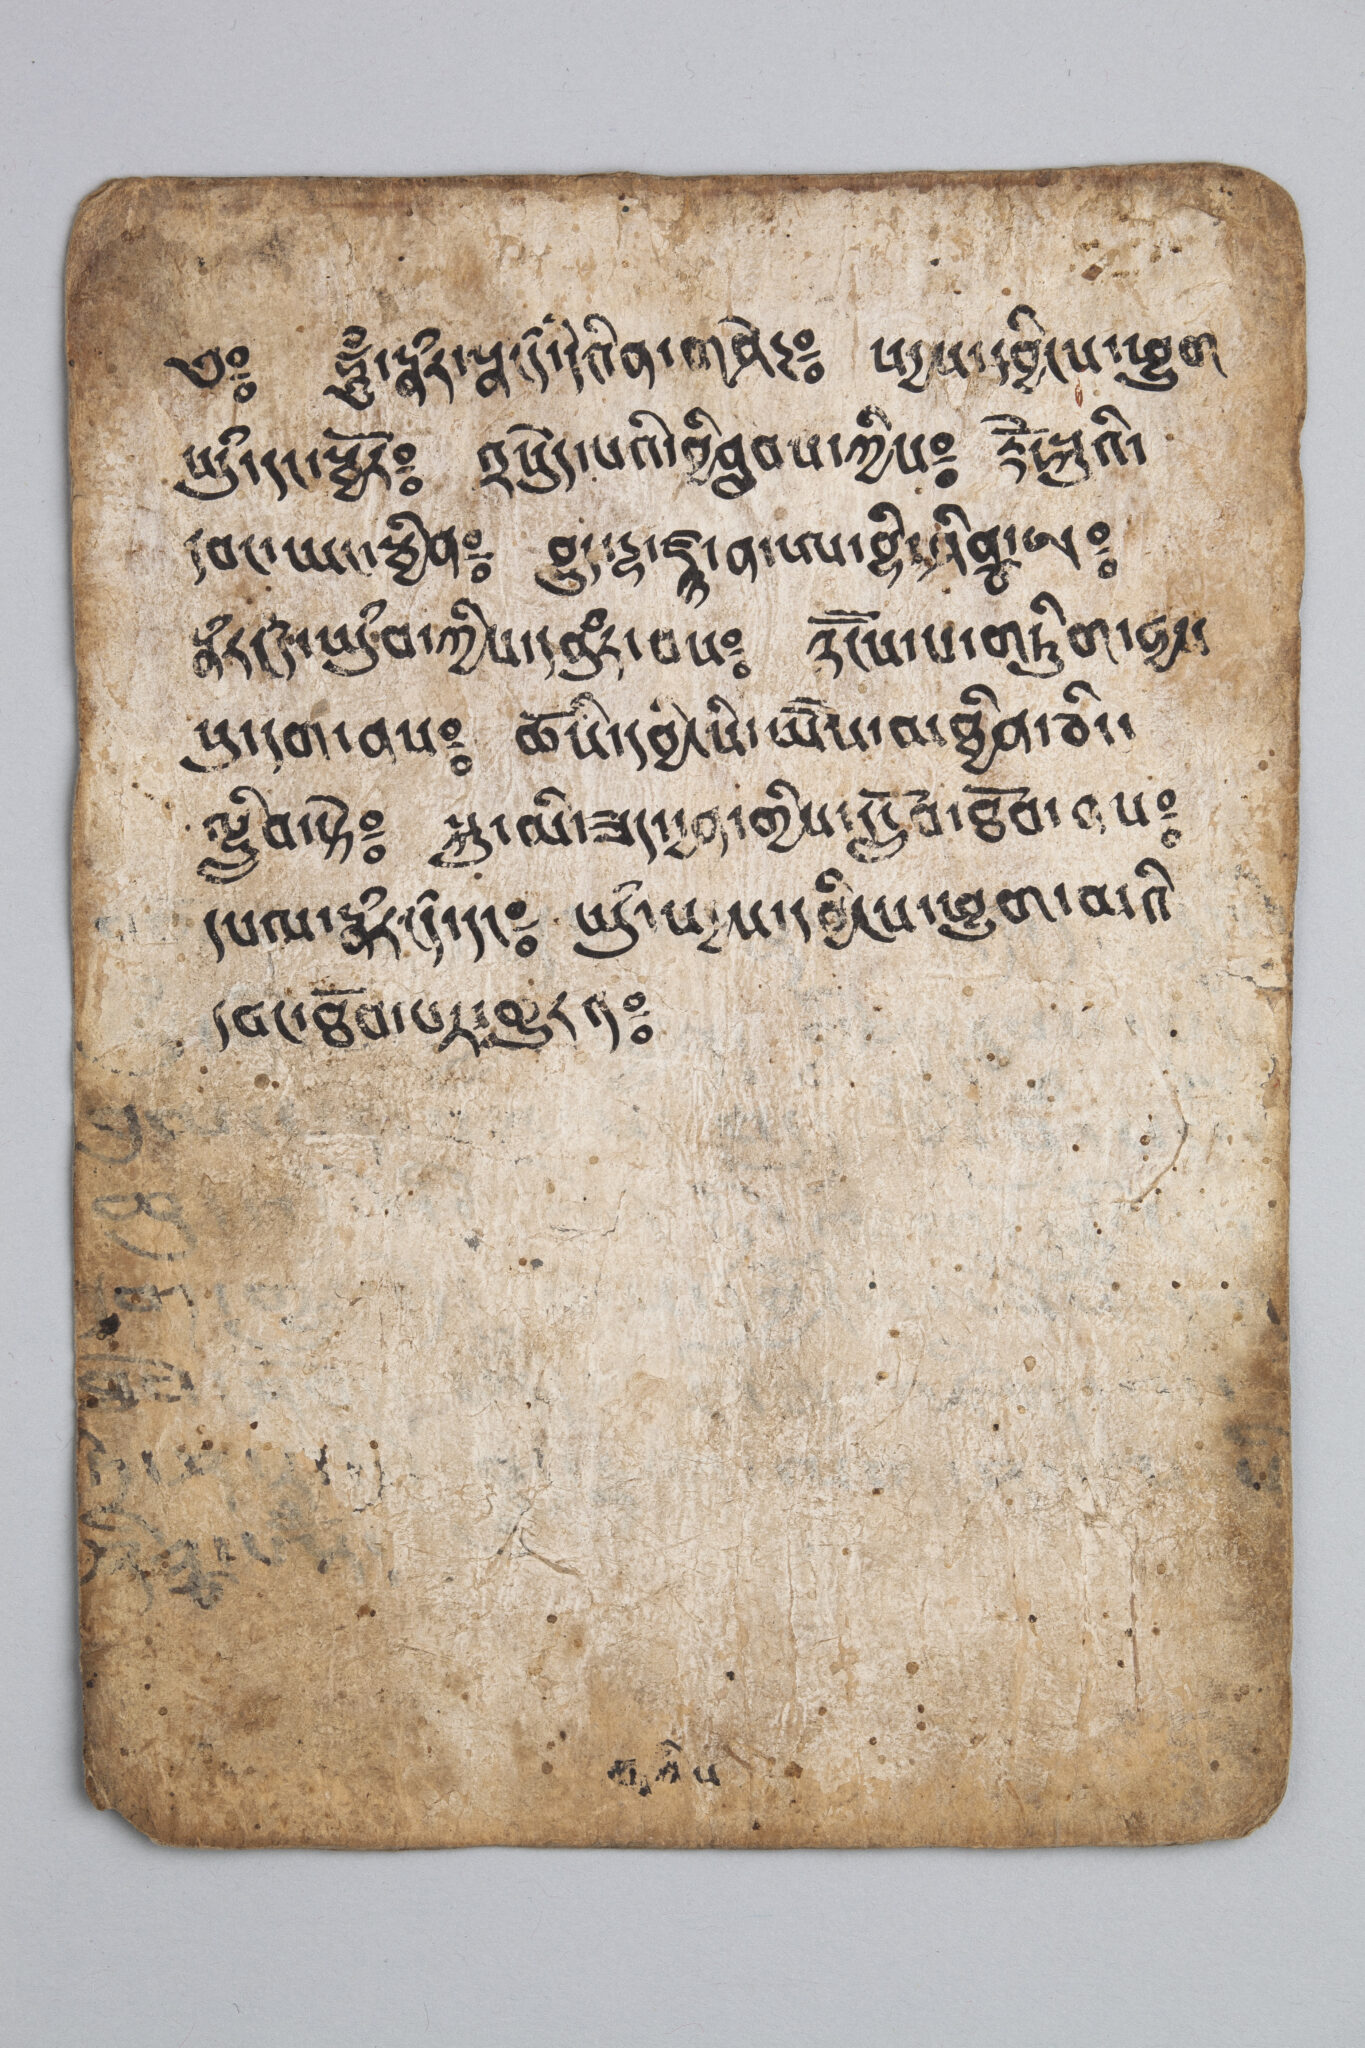 Rectangular tea-brown page, edges and corners darkened, with eight lines of text covering top half